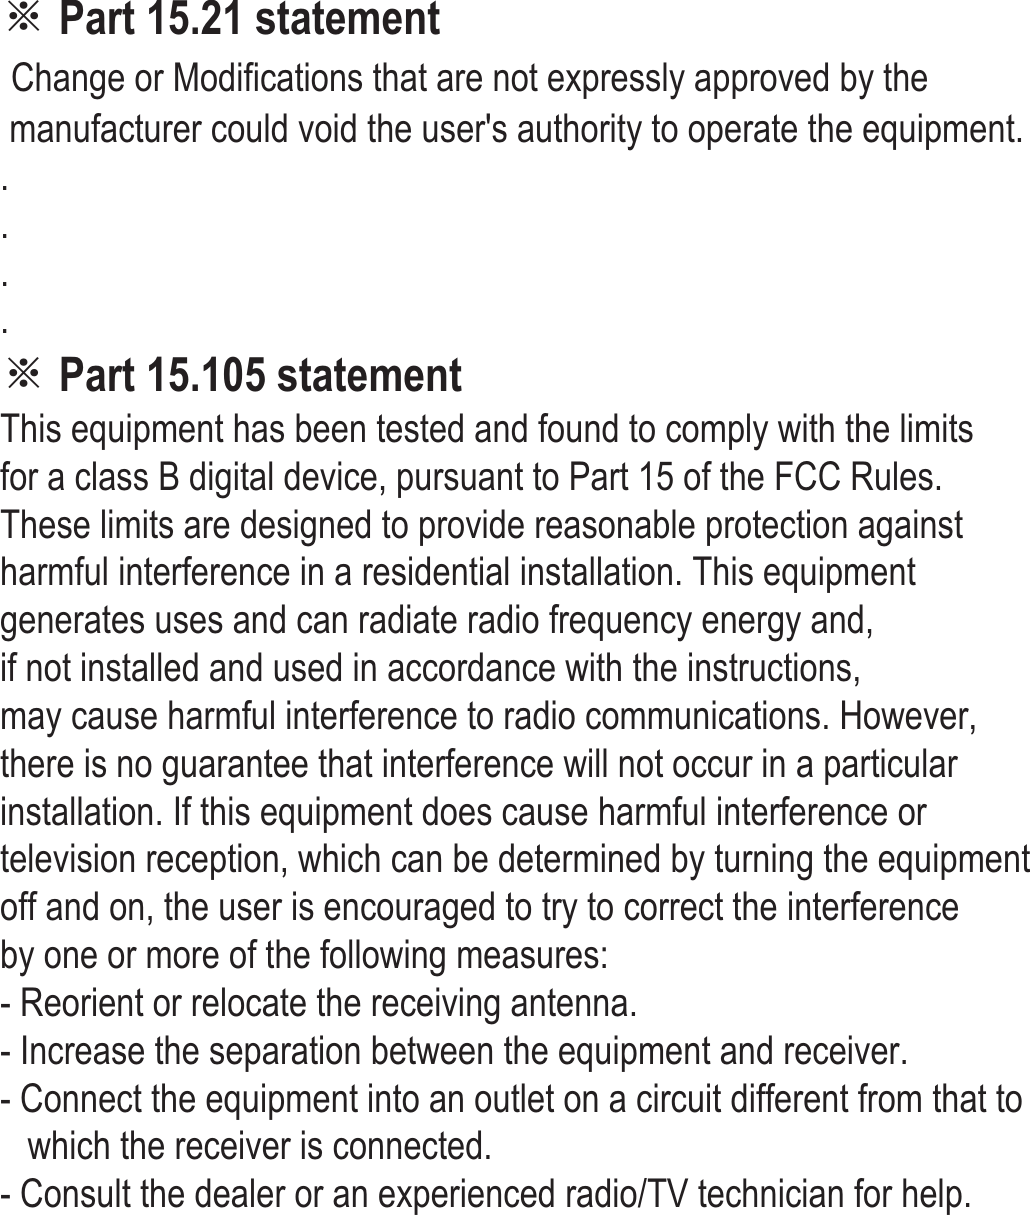 ※ Part 15.21 statement Change or Modifications that are not expressly approved by the  manufacturer could void the user&apos;s authority to operate the equipment.  . . . . ※ Part 15.105 statement This equipment has been tested and found to comply with the limits  for a class B digital device, pursuant to Part 15 of the FCC Rules.  These limits are designed to provide reasonable protection against  harmful interference in a residential installation. This equipment  generates uses and can radiate radio frequency energy and,  if not installed and used in accordance with the instructions,  may cause harmful interference to radio communications. However,  there is no guarantee that interference will not occur in a particular installation. If this equipment does cause harmful interference or  television reception, which can be determined by turning the equipment  off and on, the user is encouraged to try to correct the interference  by one or more of the following measures: - Reorient or relocate the receiving antenna. - Increase the separation between the equipment and receiver. - Connect the equipment into an outlet on a circuit different from that to      which the receiver is connected. - Consult the dealer or an experienced radio/TV technician for help.